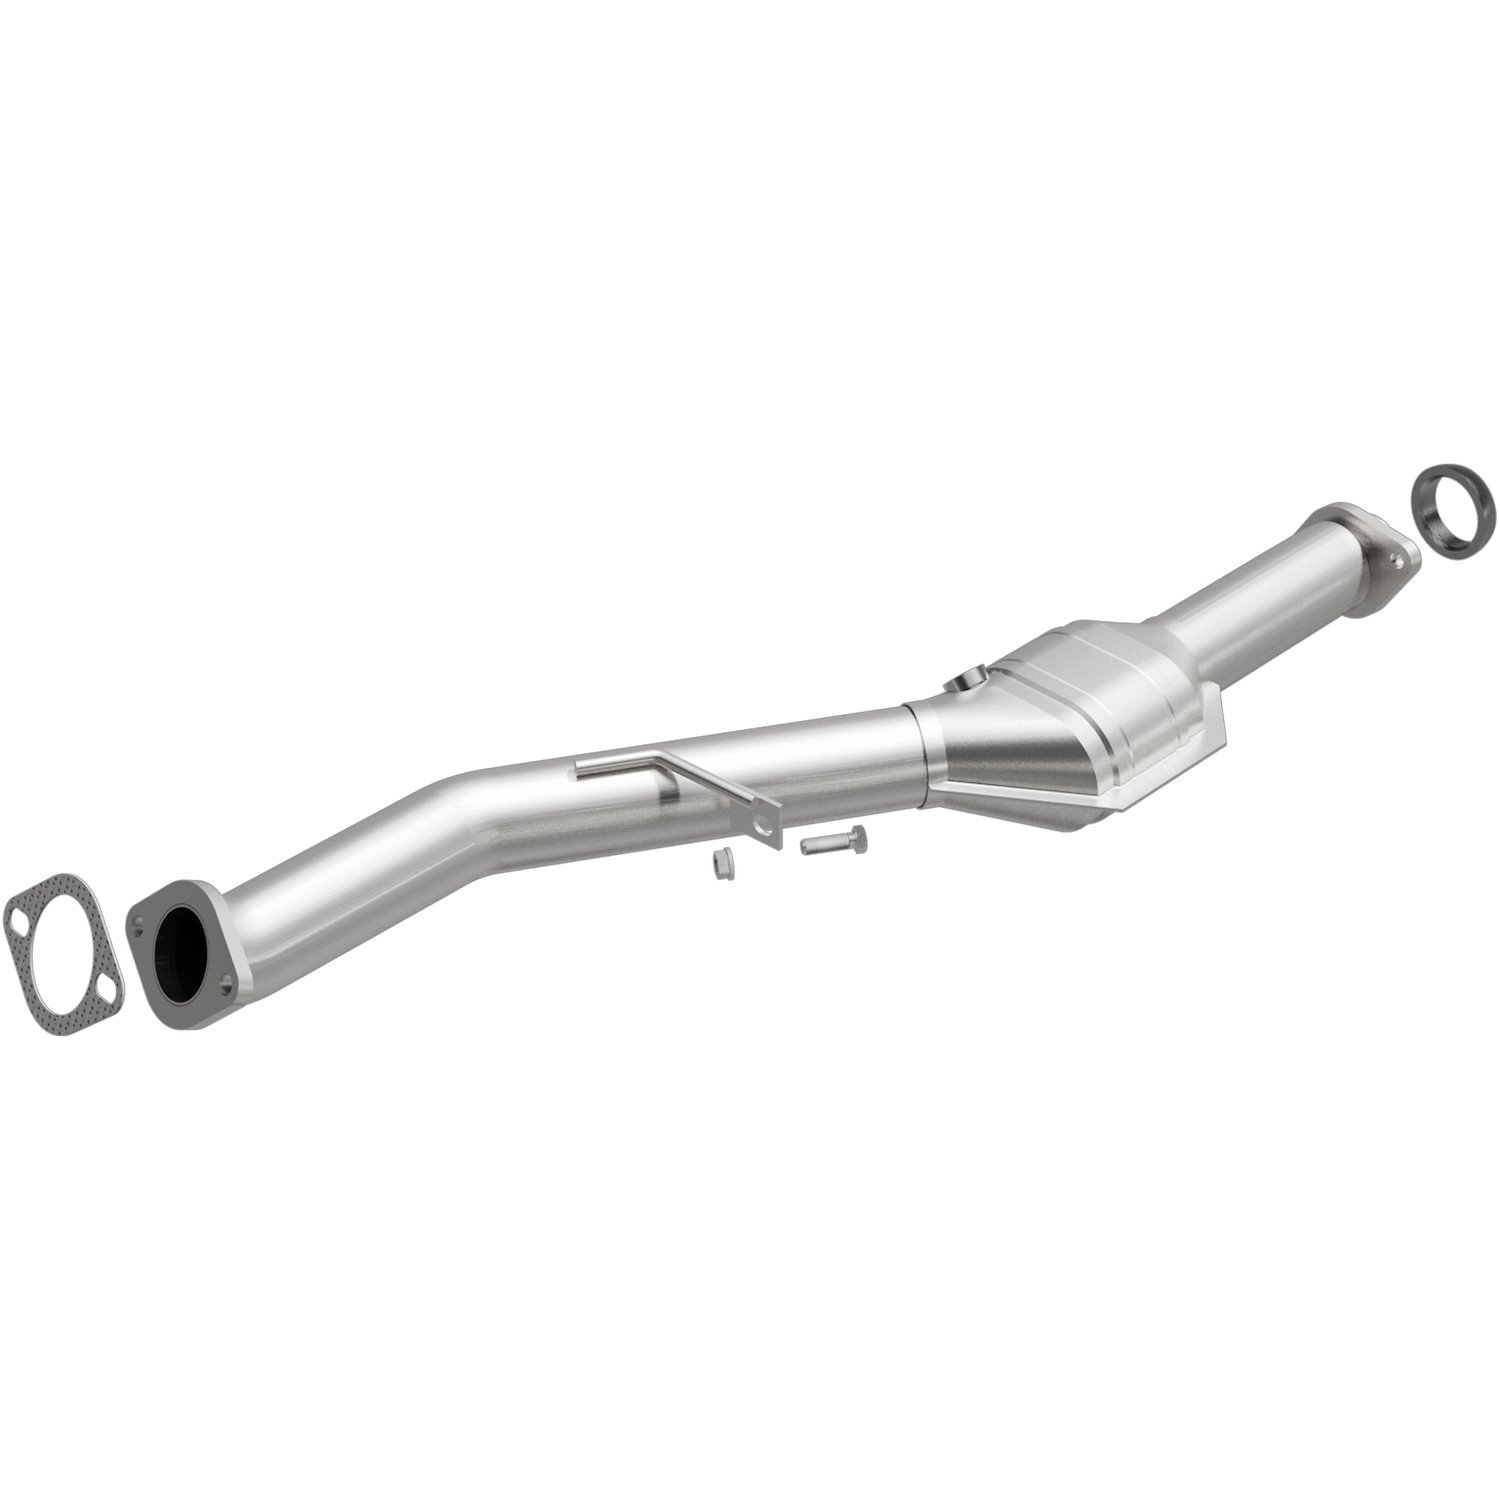 OEM Grade Federal / EPA Compliant Direct-Fit Catalytic Converter 49159